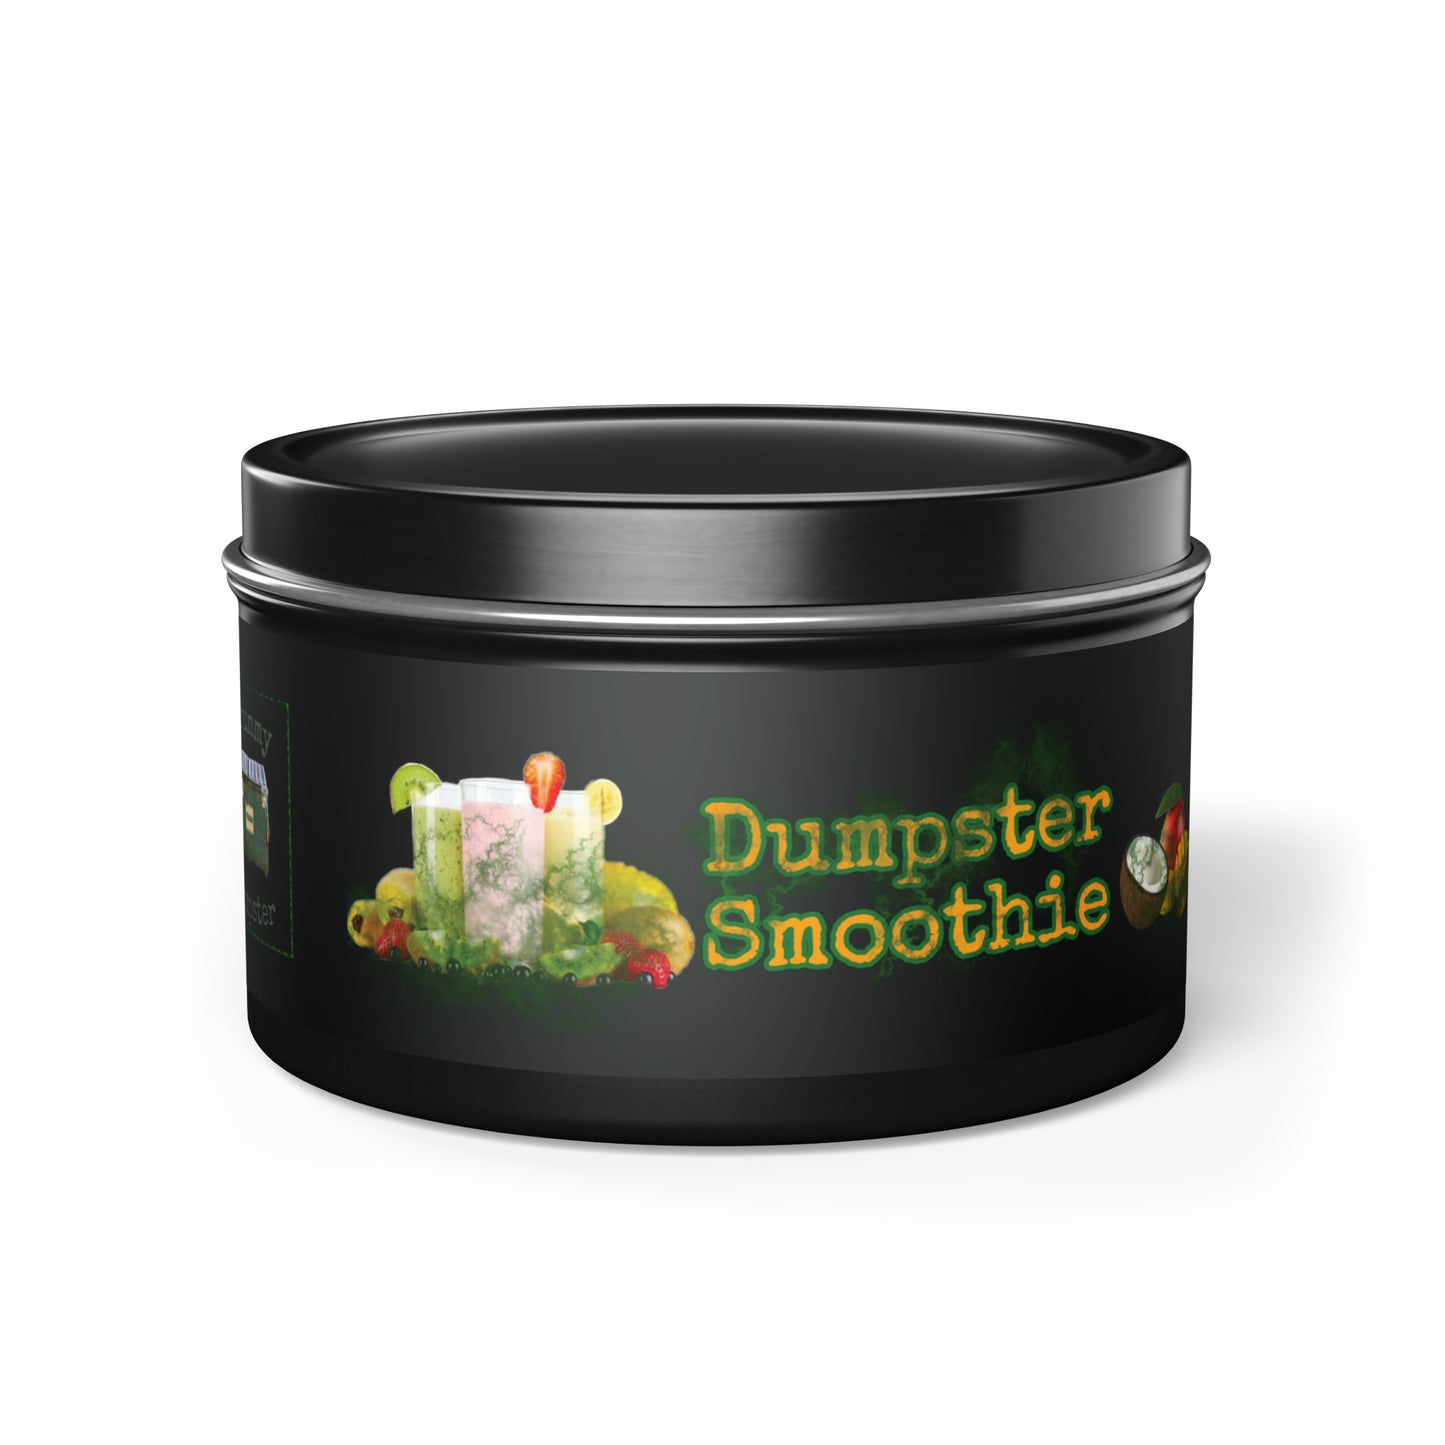 Dumpster Smoothie Tin Candle